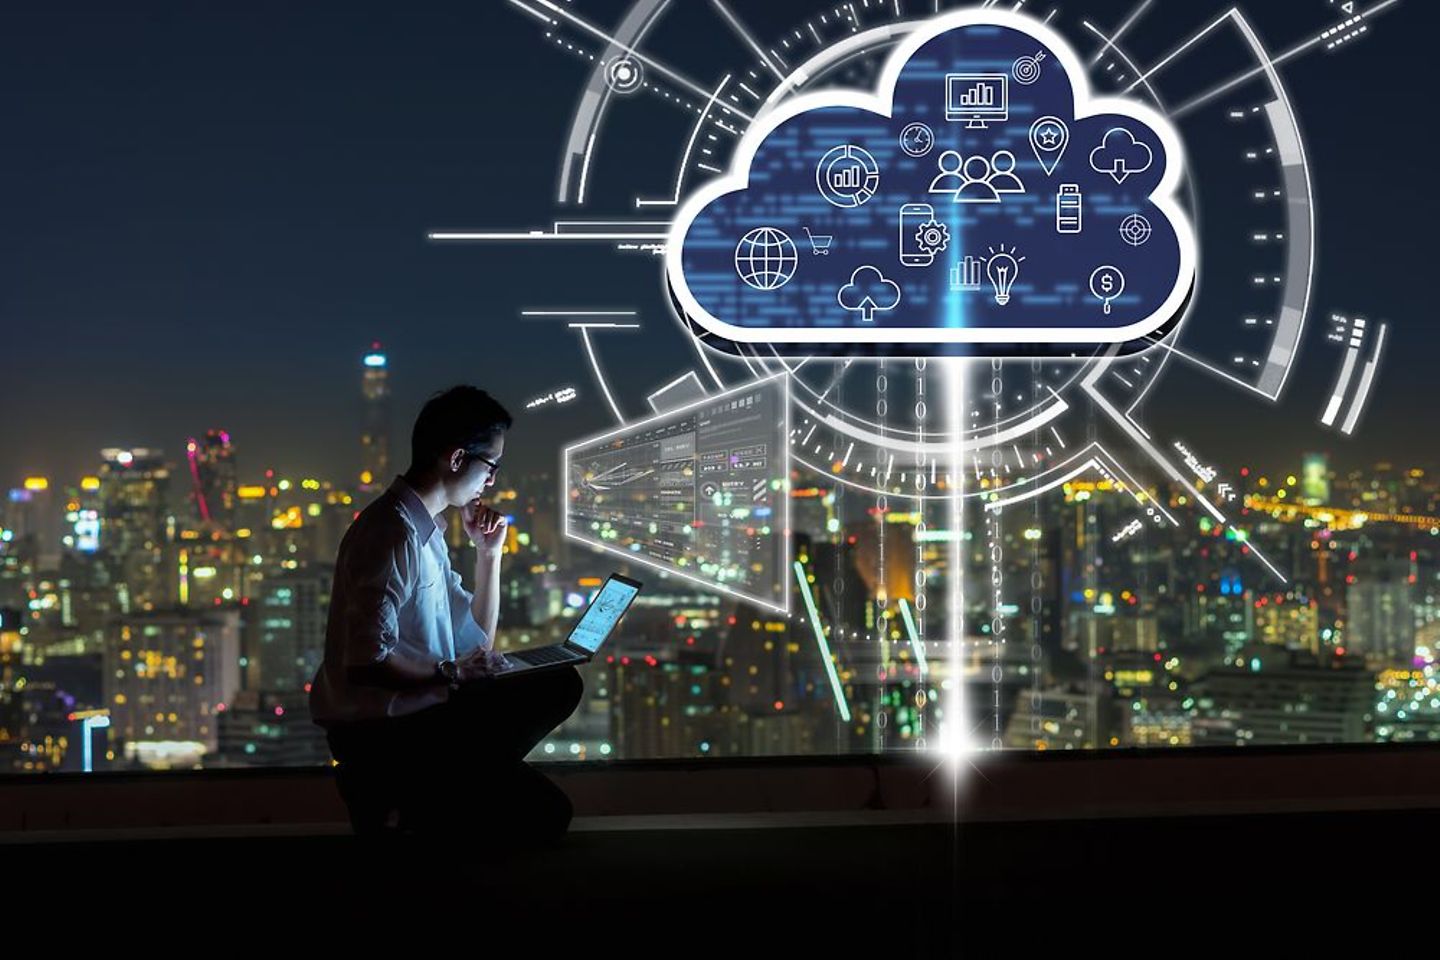 Man with laptop in a city at night and cloud symbol